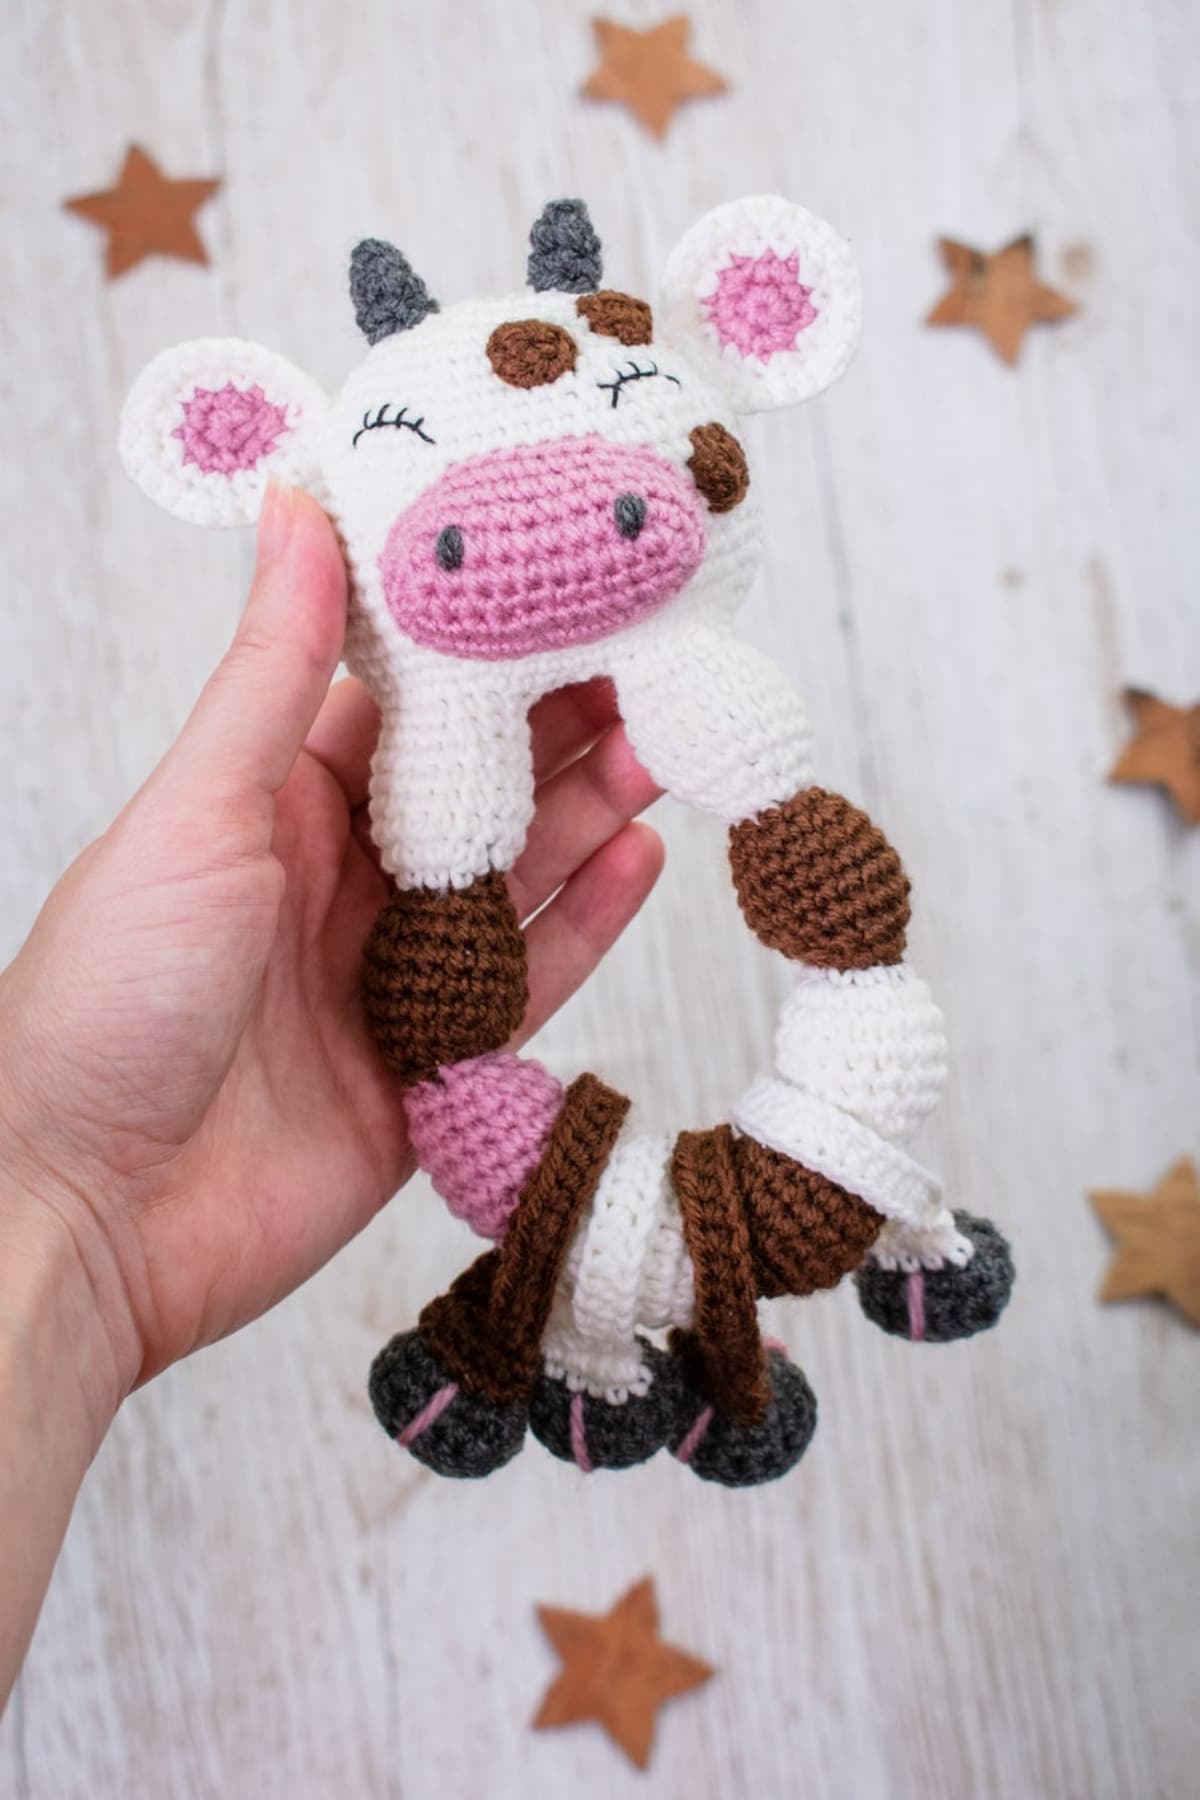 Pink, black, brown, and white crochet cow rattle with a pink nose and gray horns held in a hand with gold stars around it.